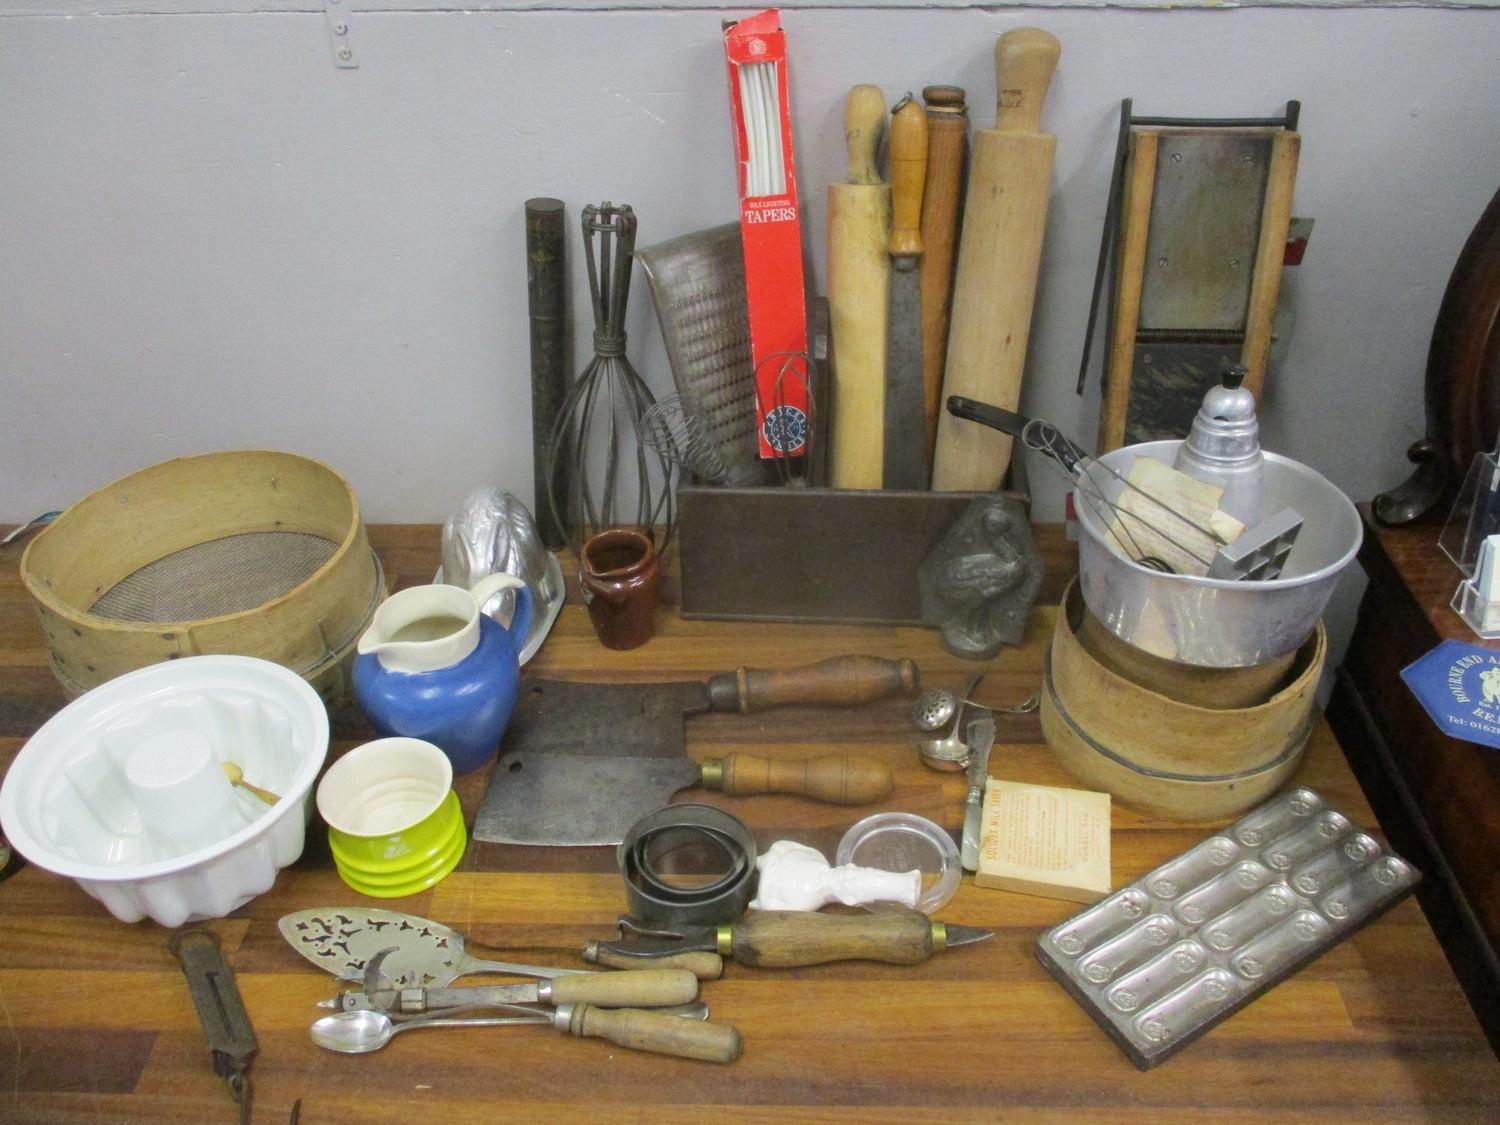 Kitchenalia to include sieves, rolling pins, china mould, cleavers, flatware, metal moulds and other